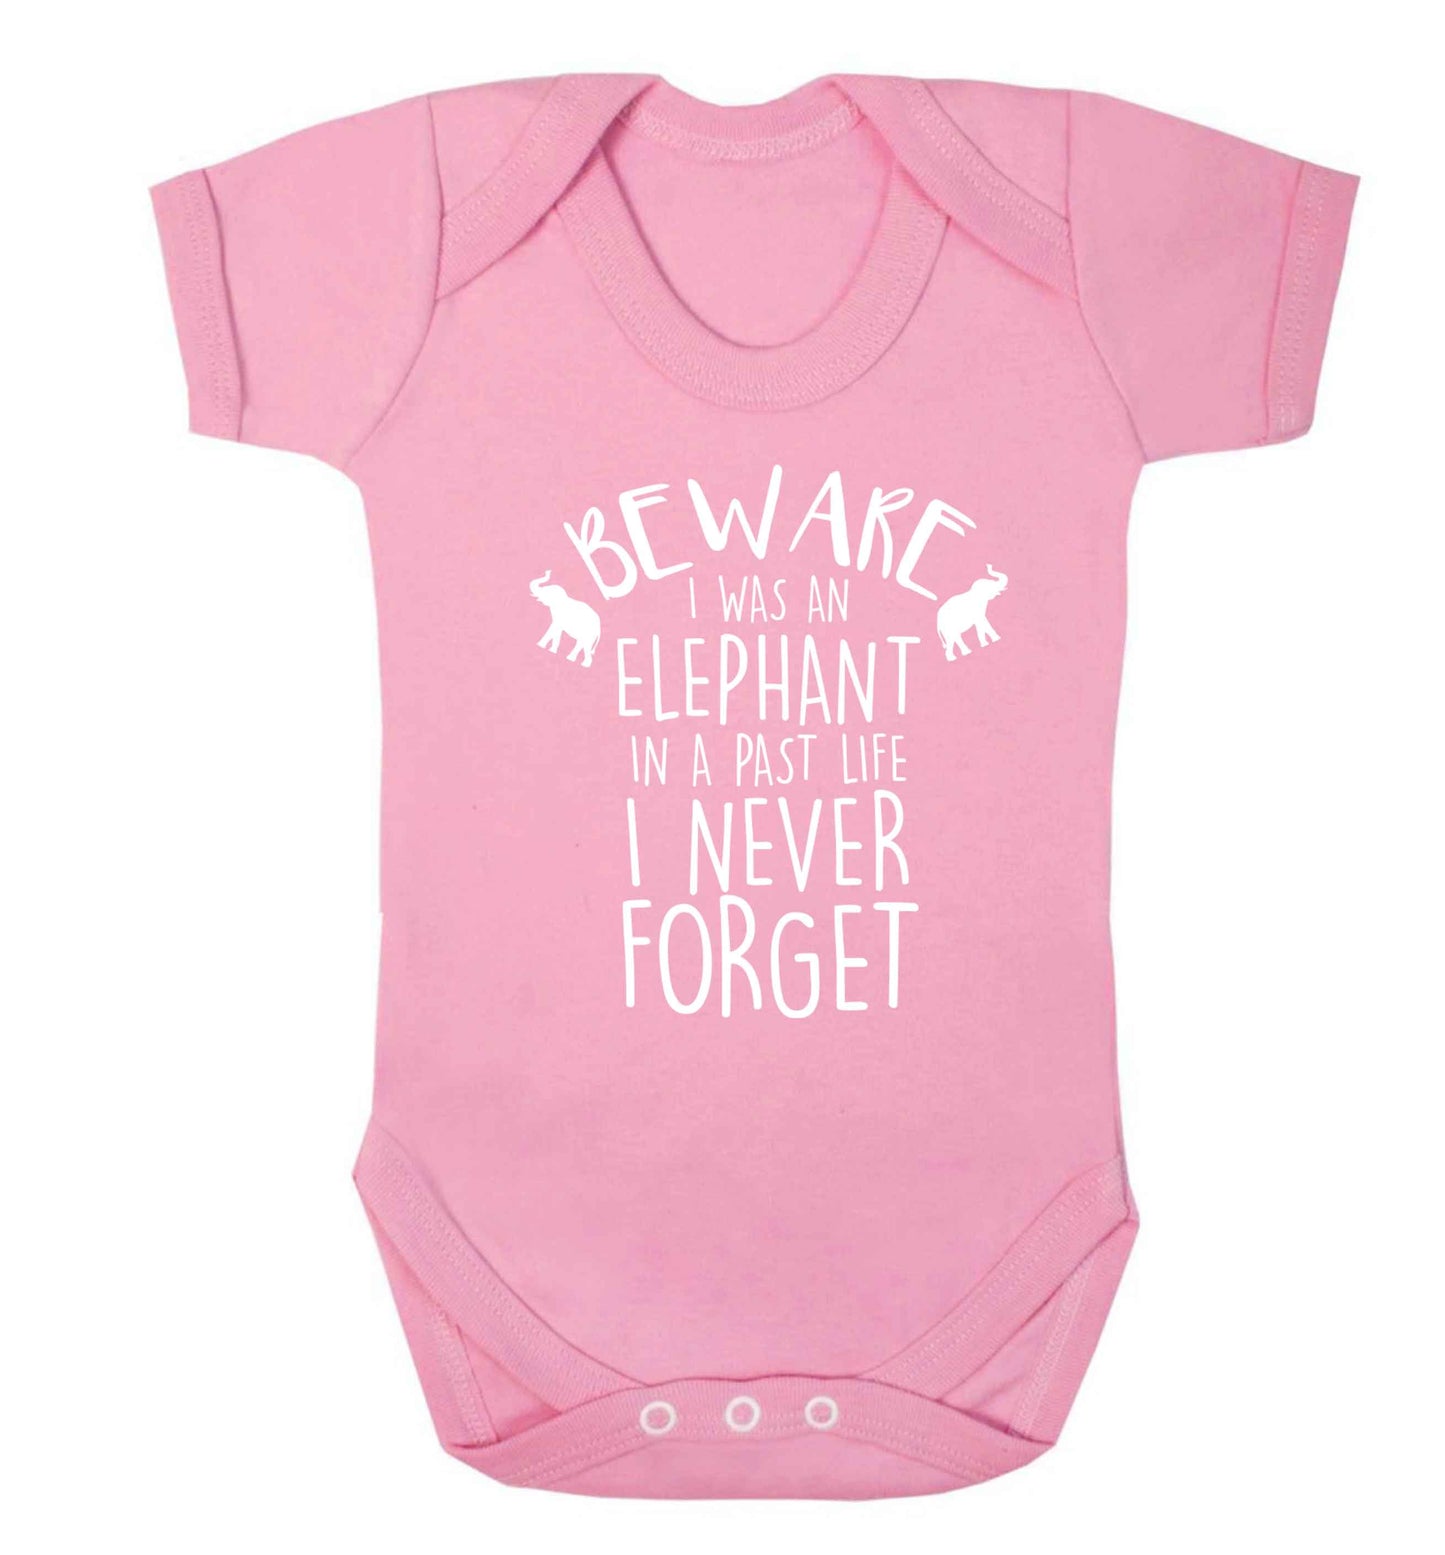 Beware I was an elephant in my past life I never forget Baby Vest pale pink 18-24 months